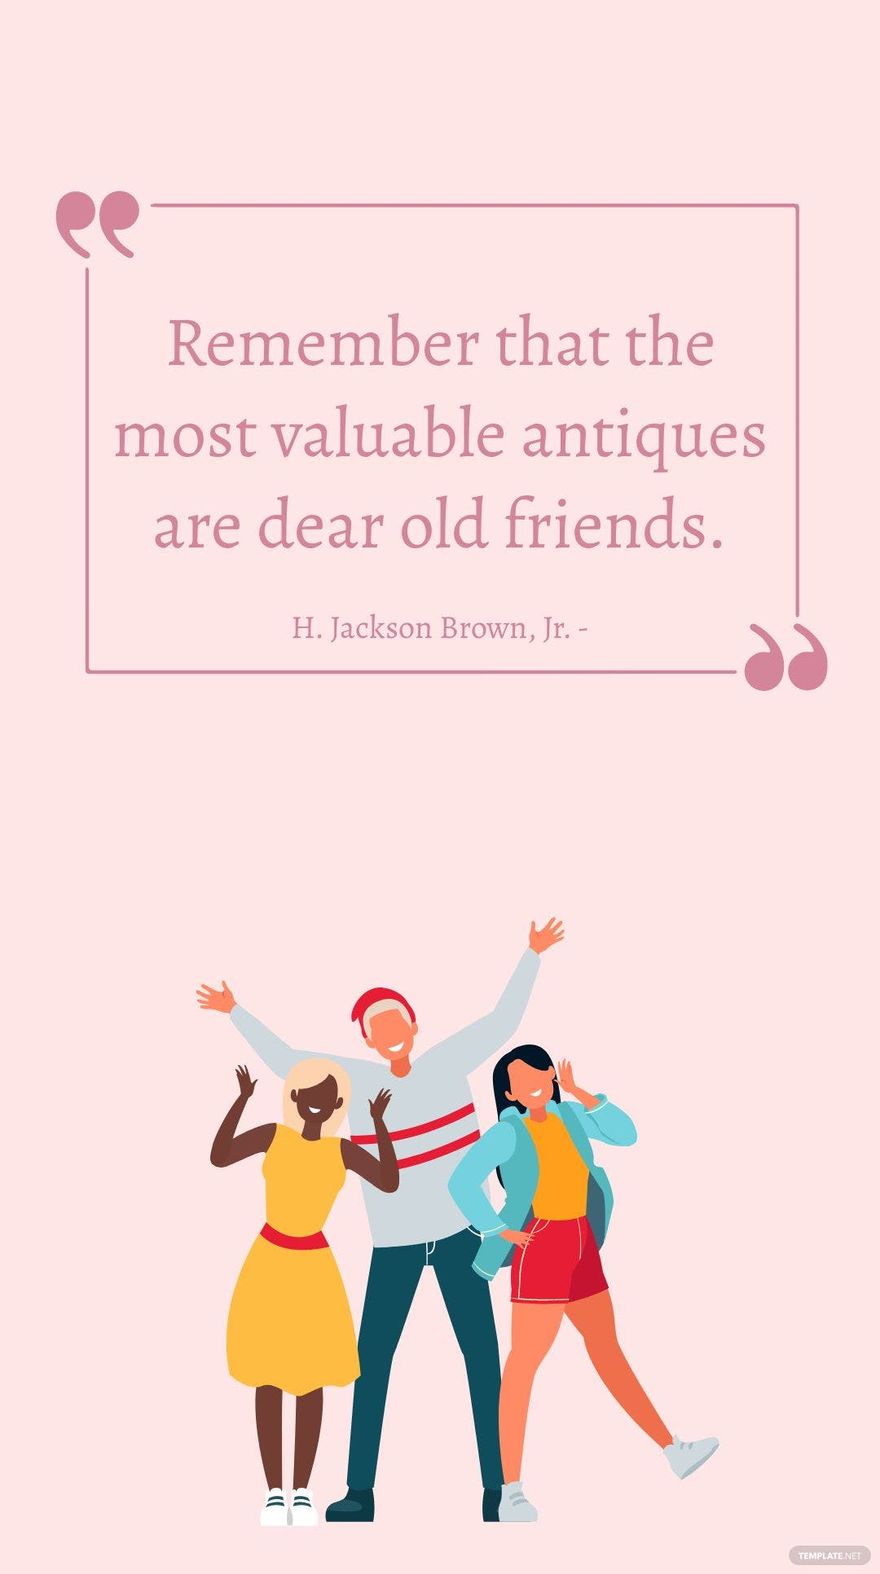 H. Jackson Brown, Jr. - Remember that the most valuable antiques are dear old friends.